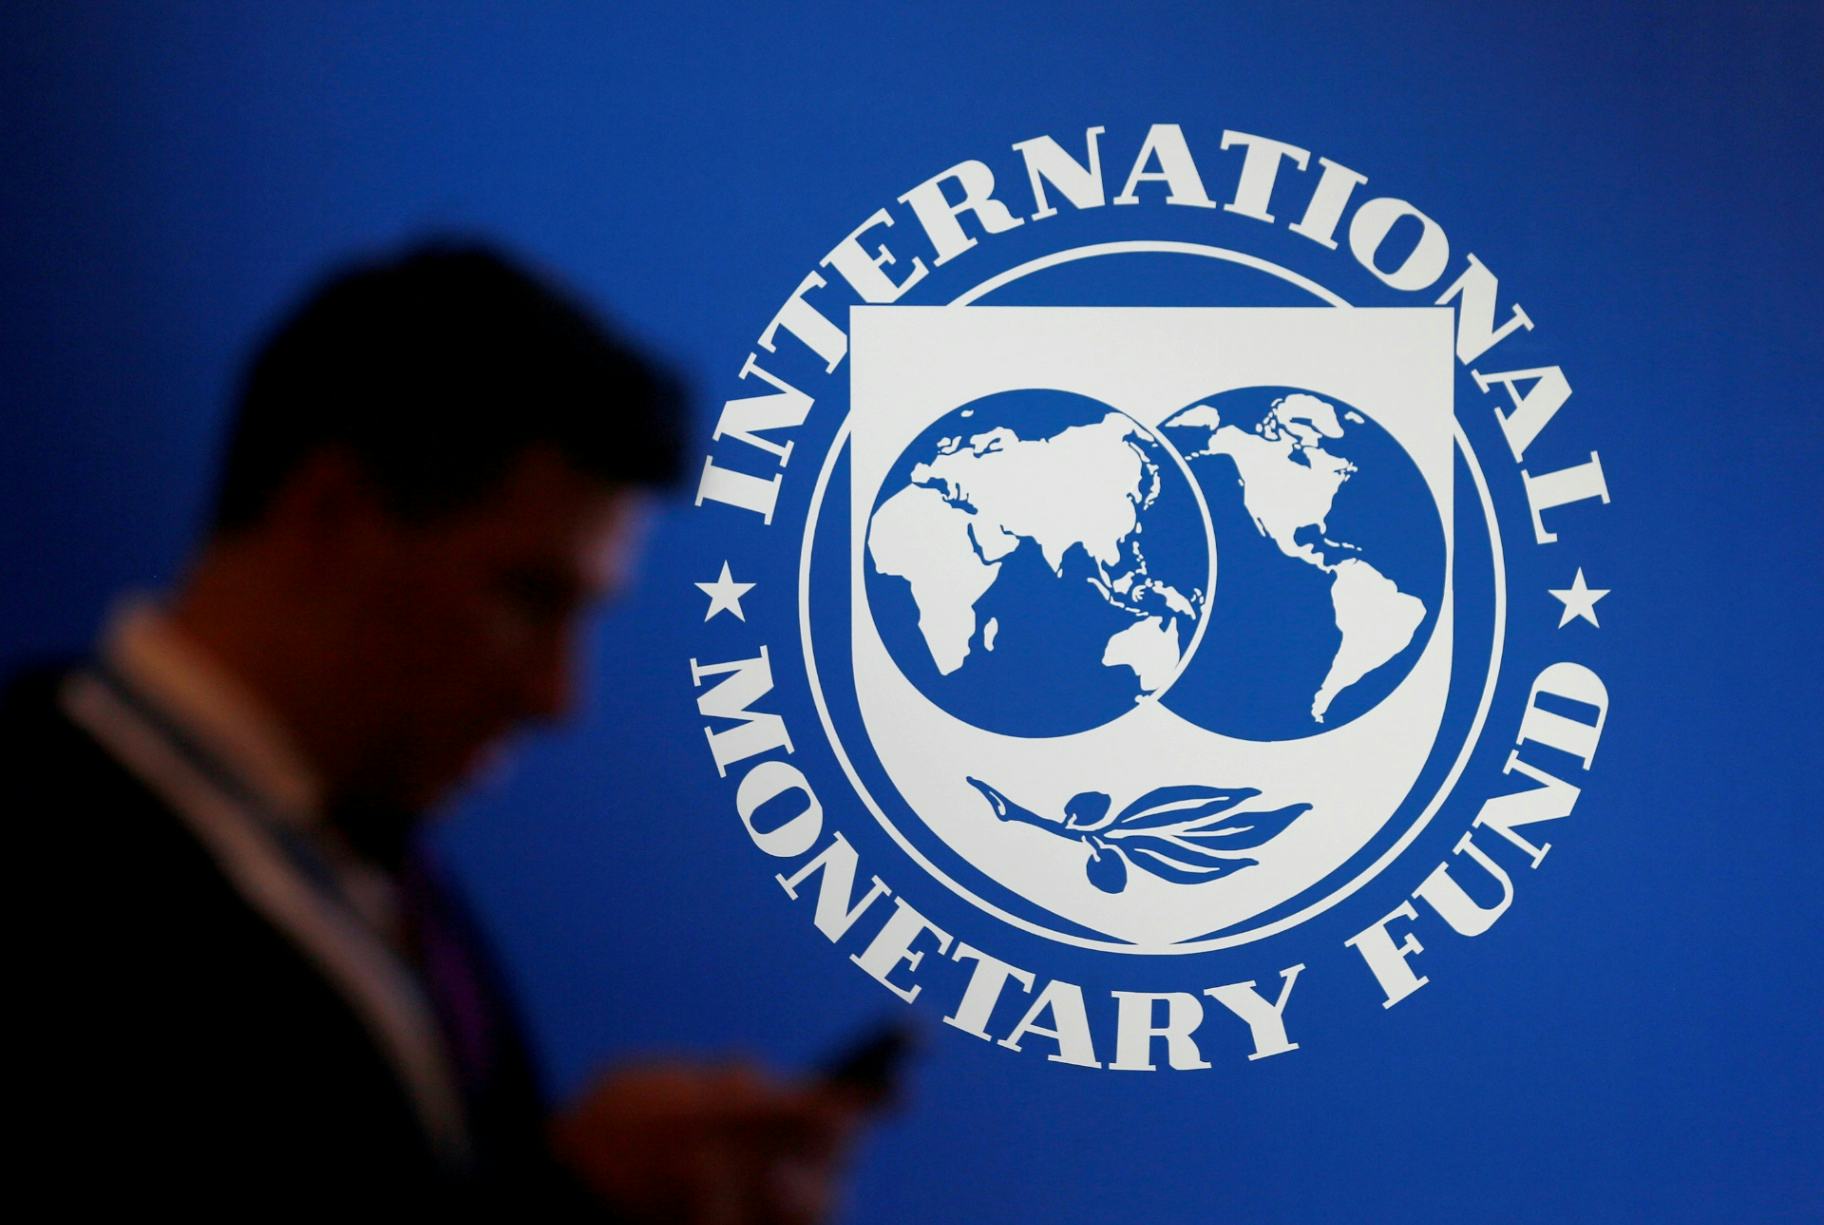 Why was the IMF tranche delayed?